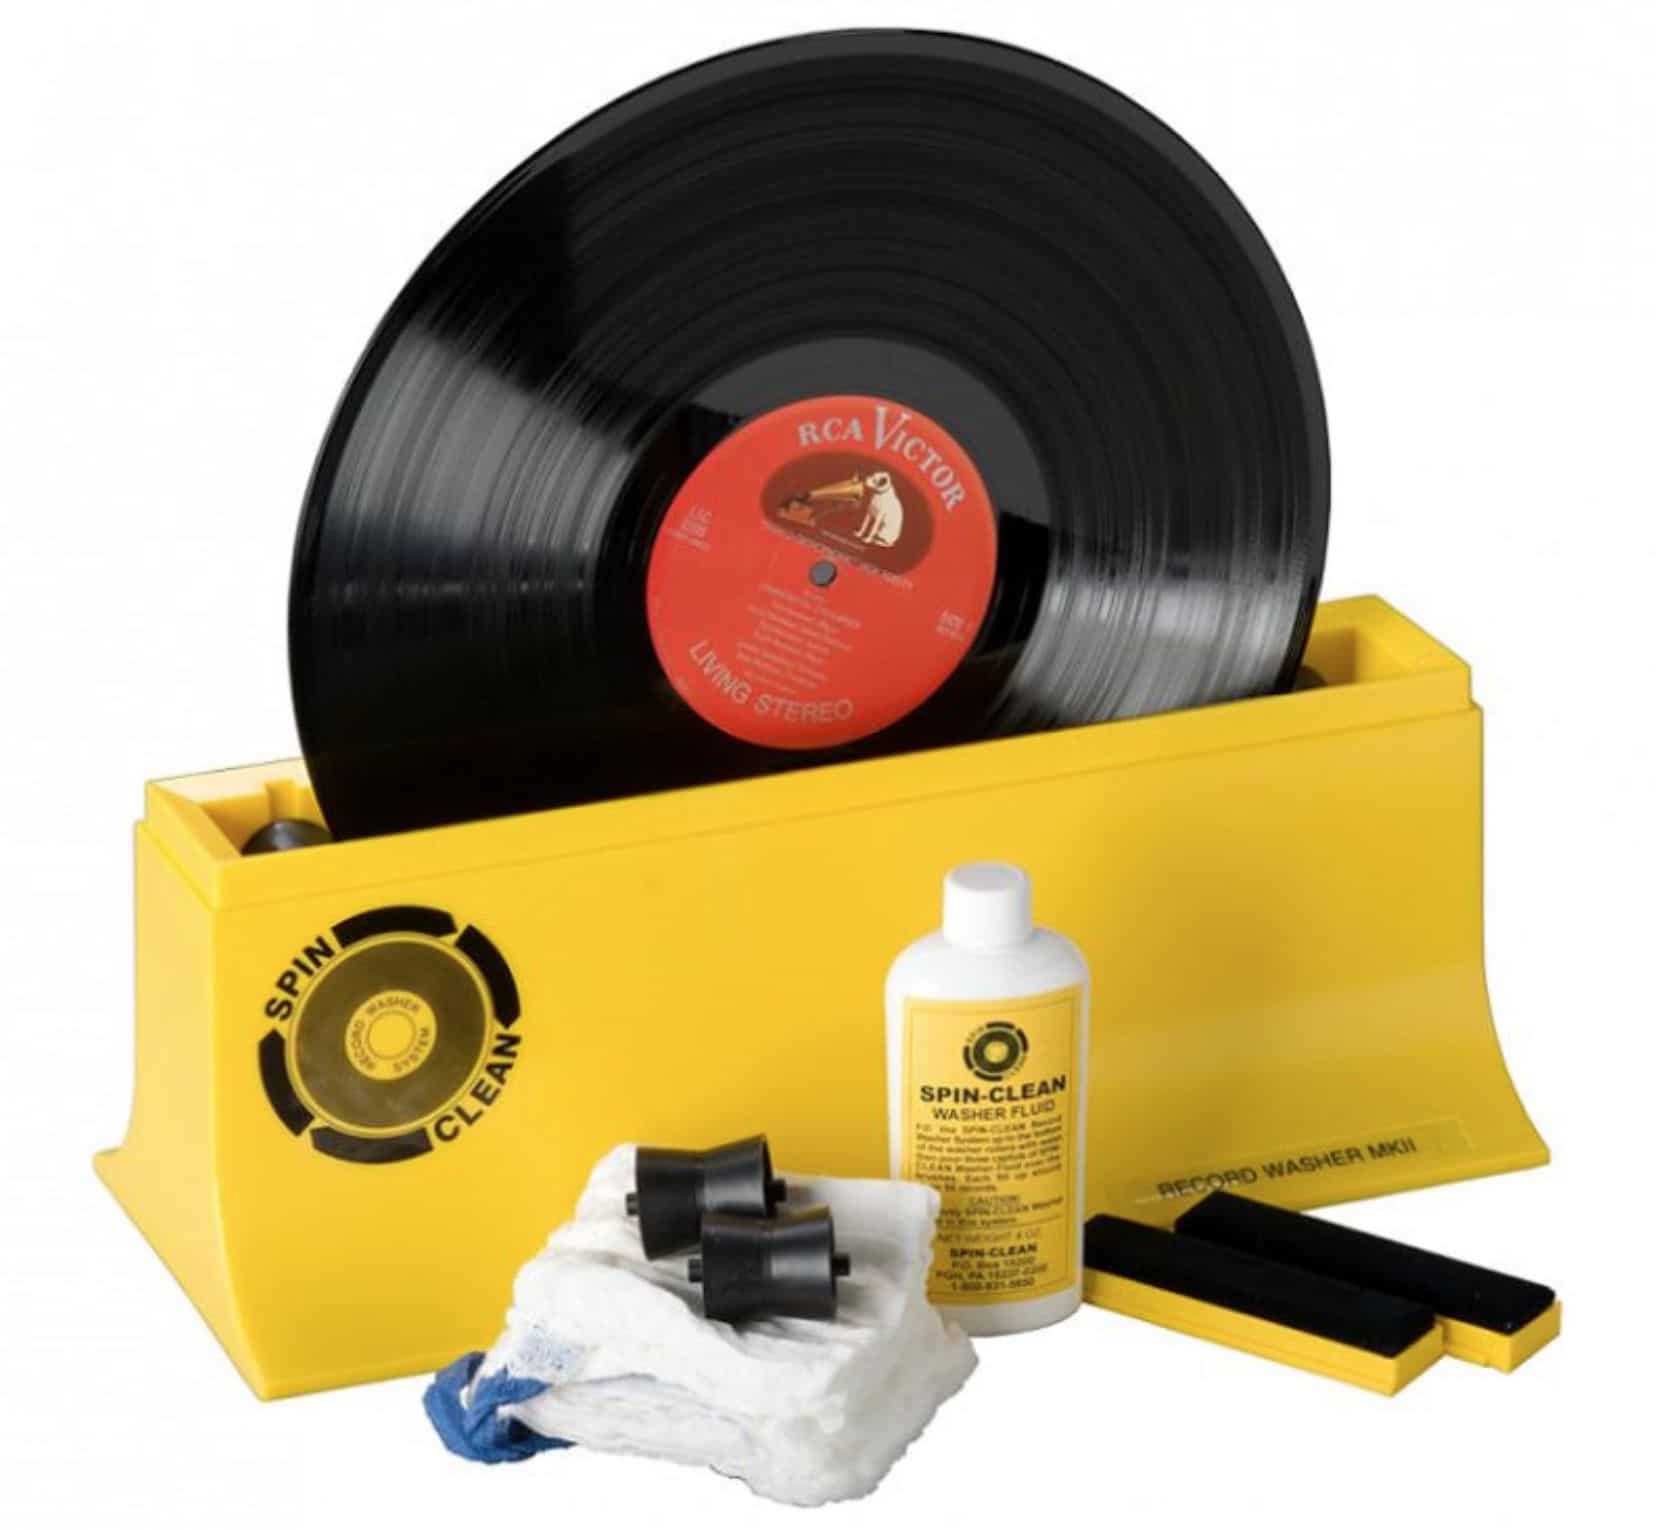 Disco-Antistat Vinyl Cleaning Machine From Knosti